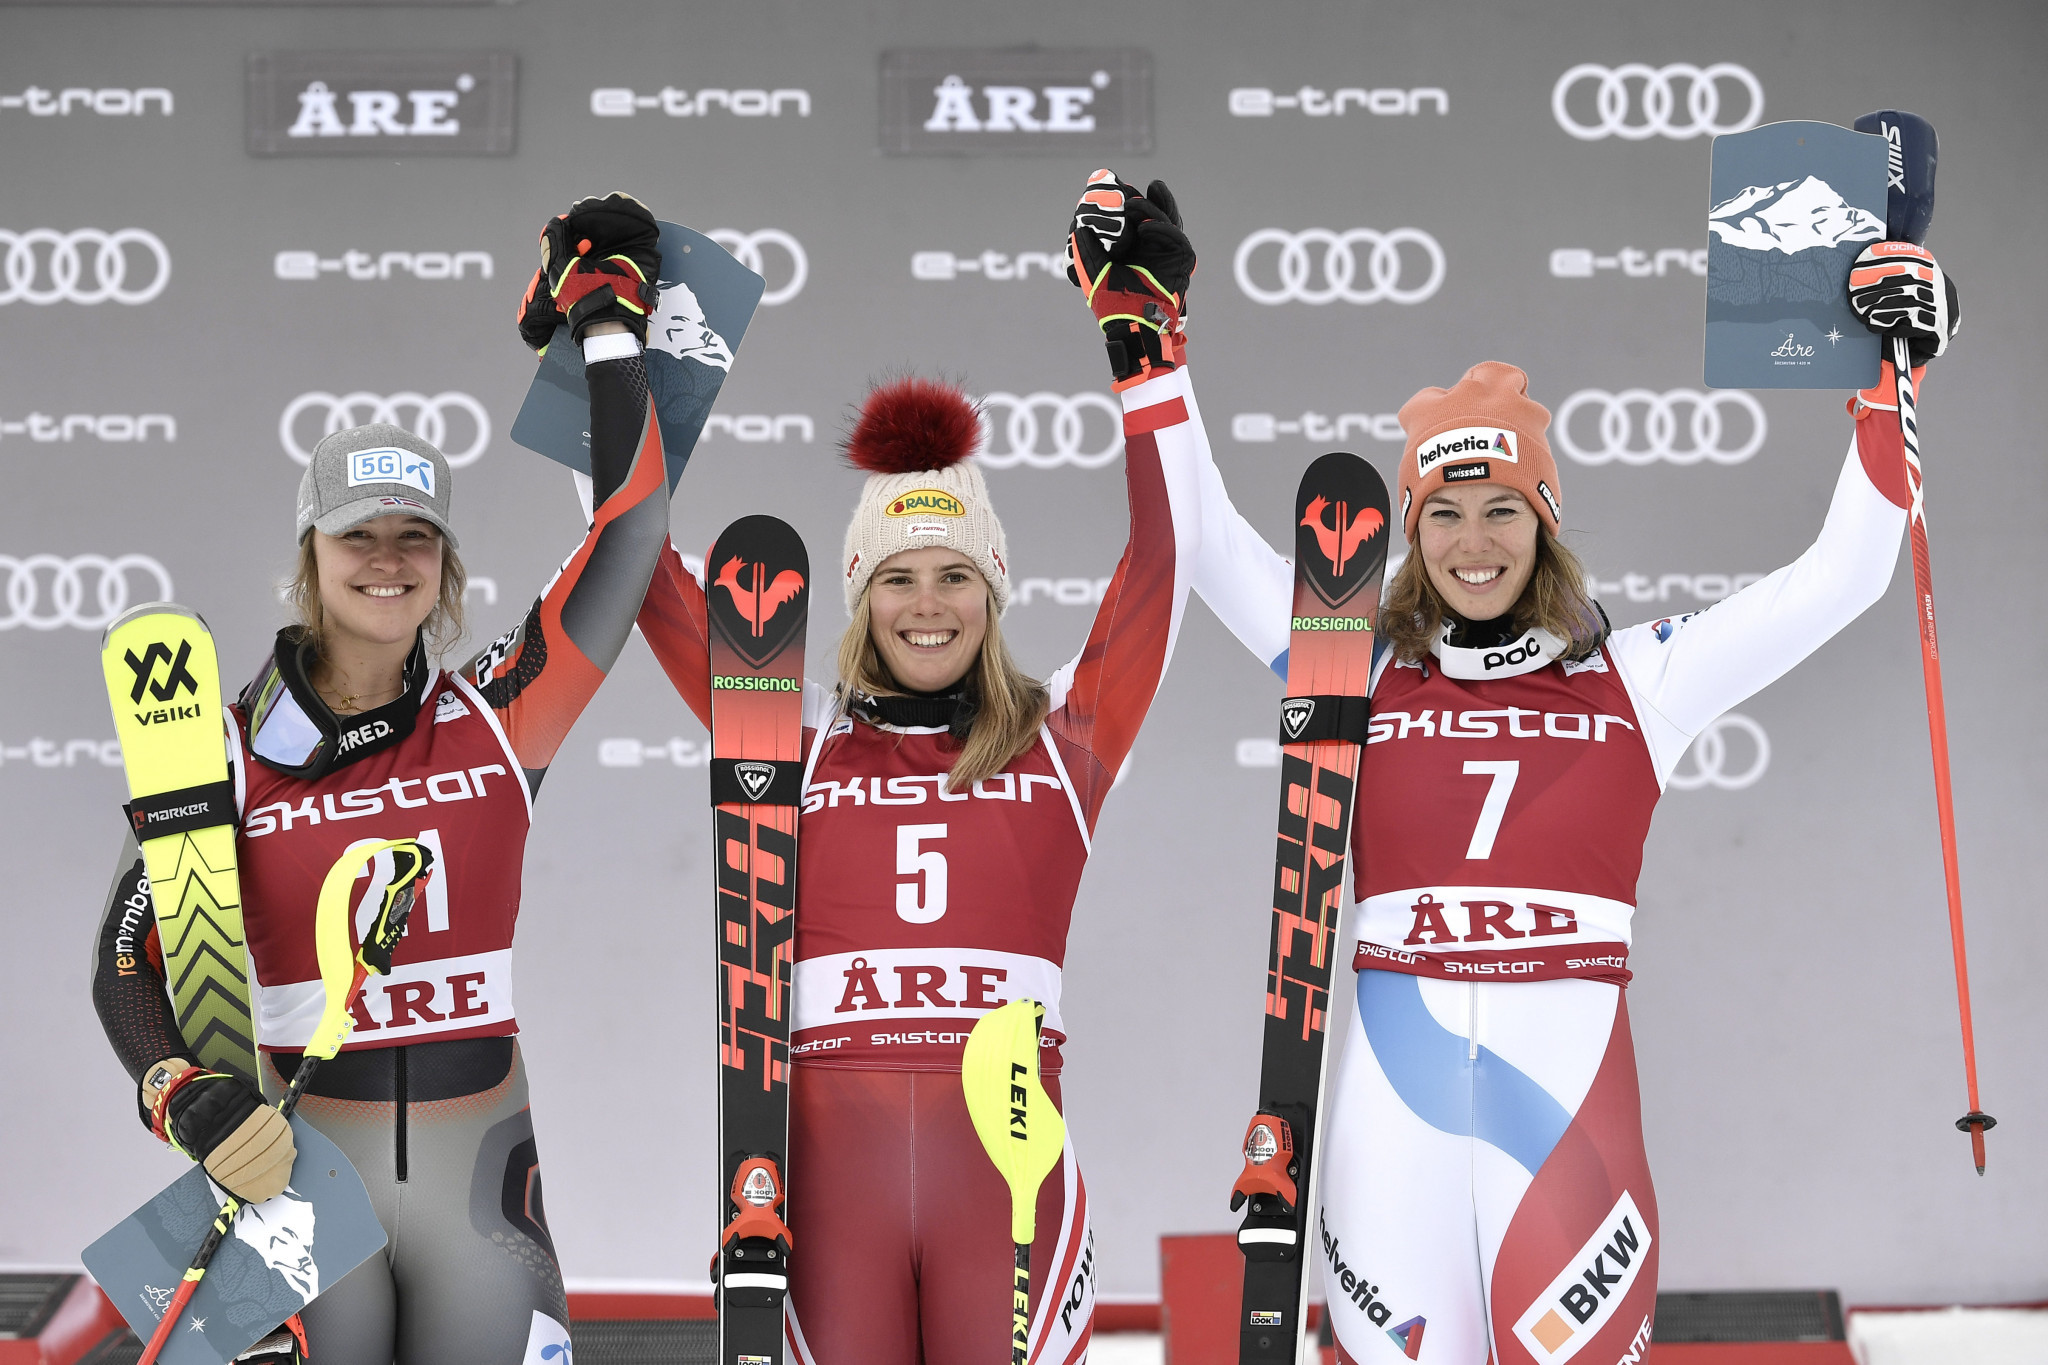 This was the first FIS Alpine Ski World Cup race since January 2016 where the podium did not feature the United States' Mikaela Shiffrin or Slovakia's Petra Vlhová ©Getty Images